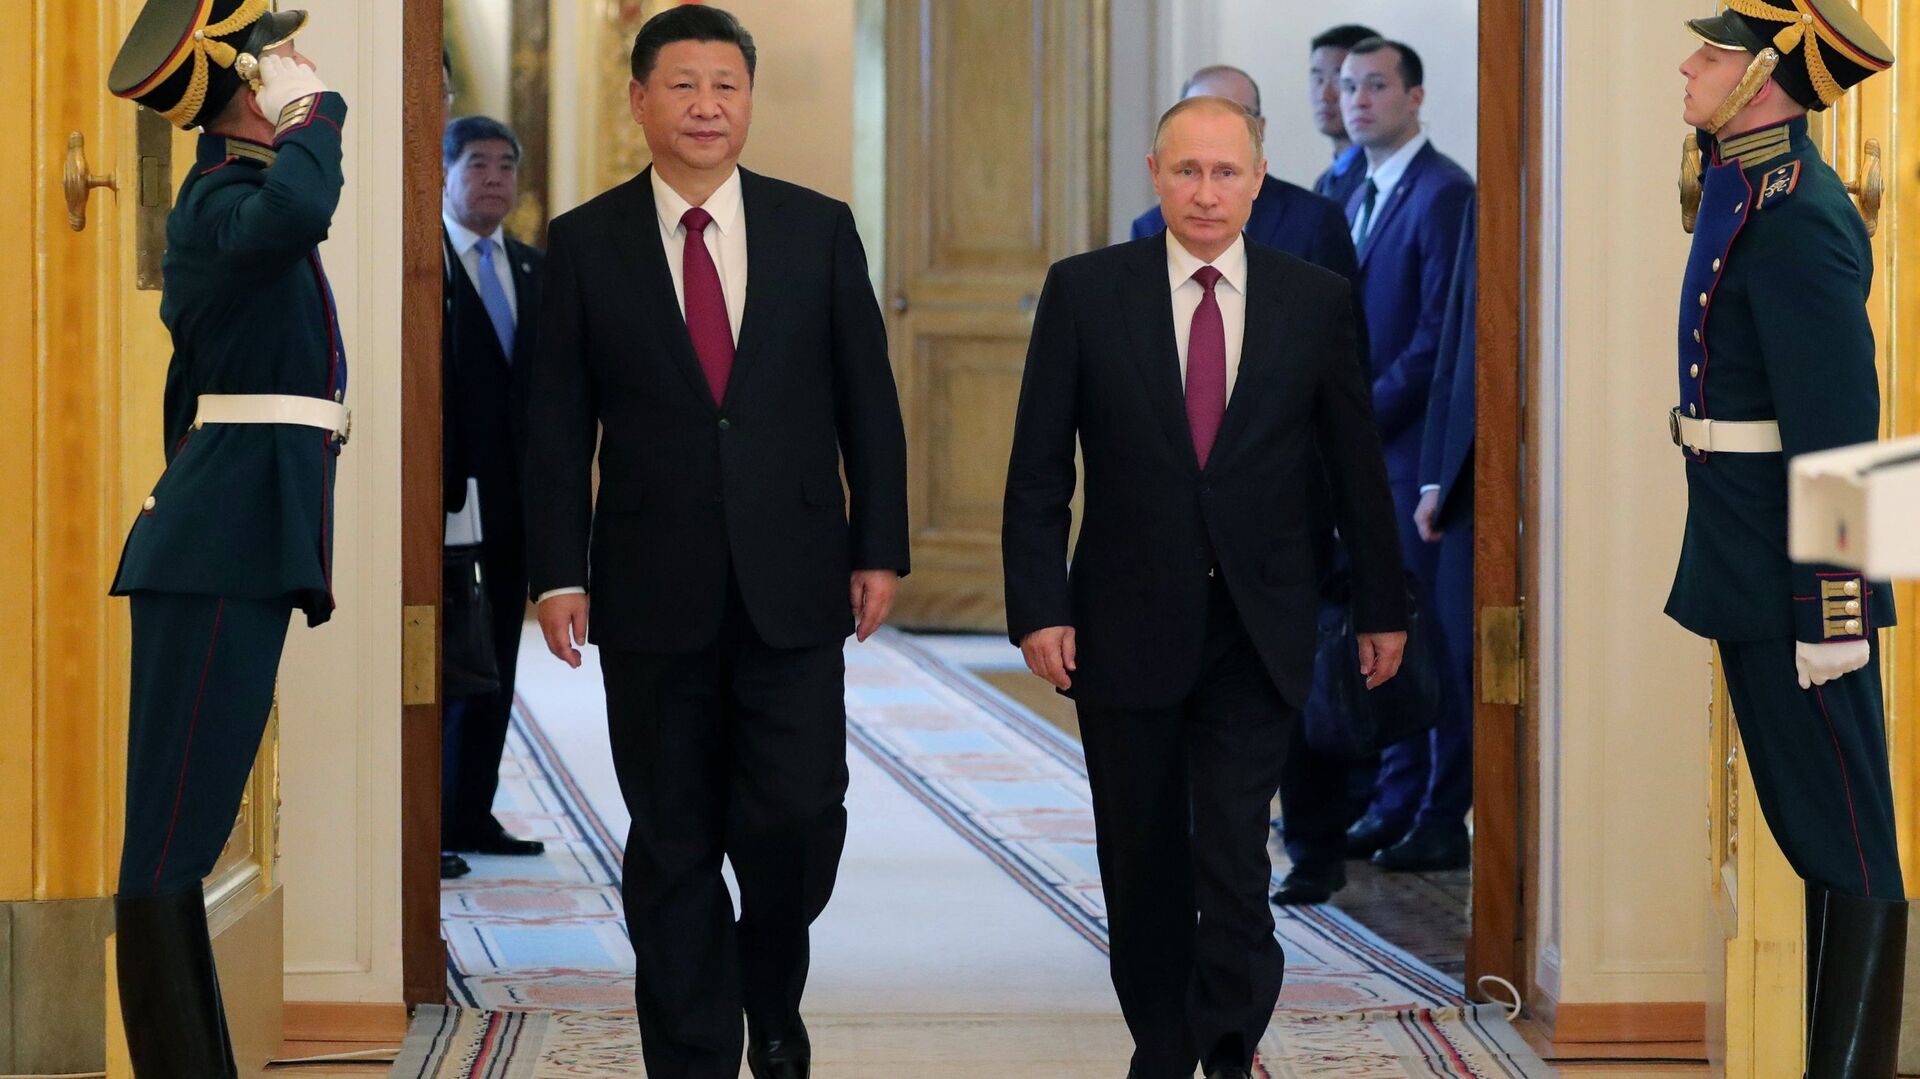 July 4, 2017. From right: Russian President Vladimir Putin meets with People's Republic of China President Xi Jinping in Moscow. - Sputnik International, 1920, 12.08.2021